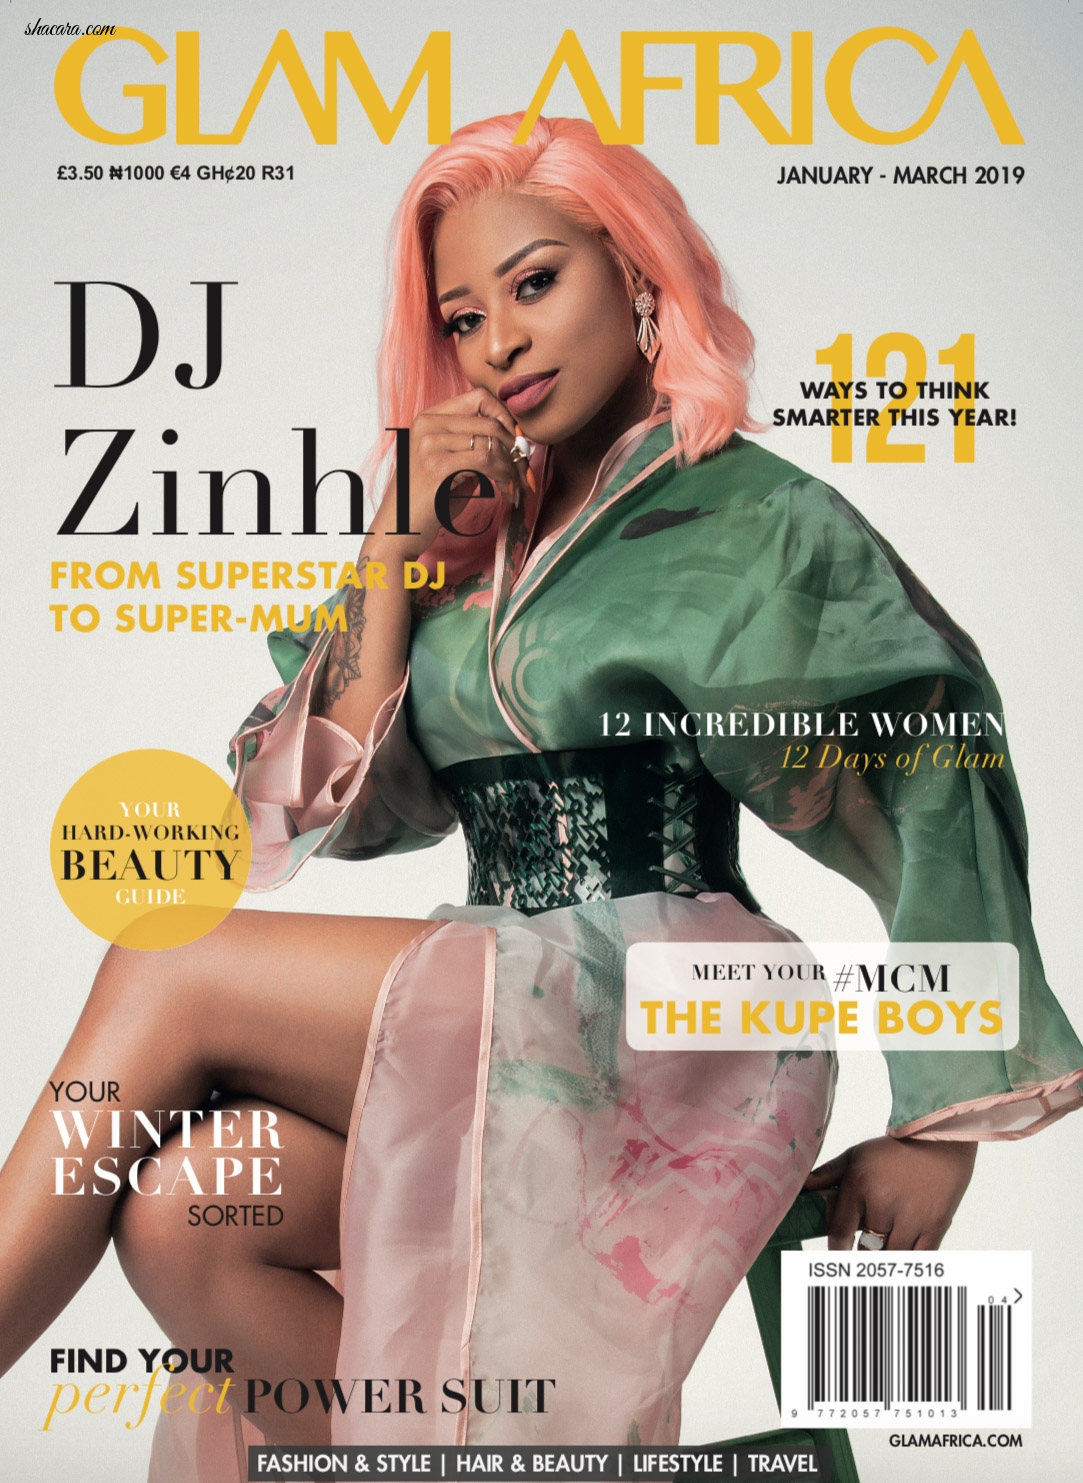 South Africa’s DJ Zinhle Covers The “Think Smart” January/March Issue Of Glam Africa Magazine